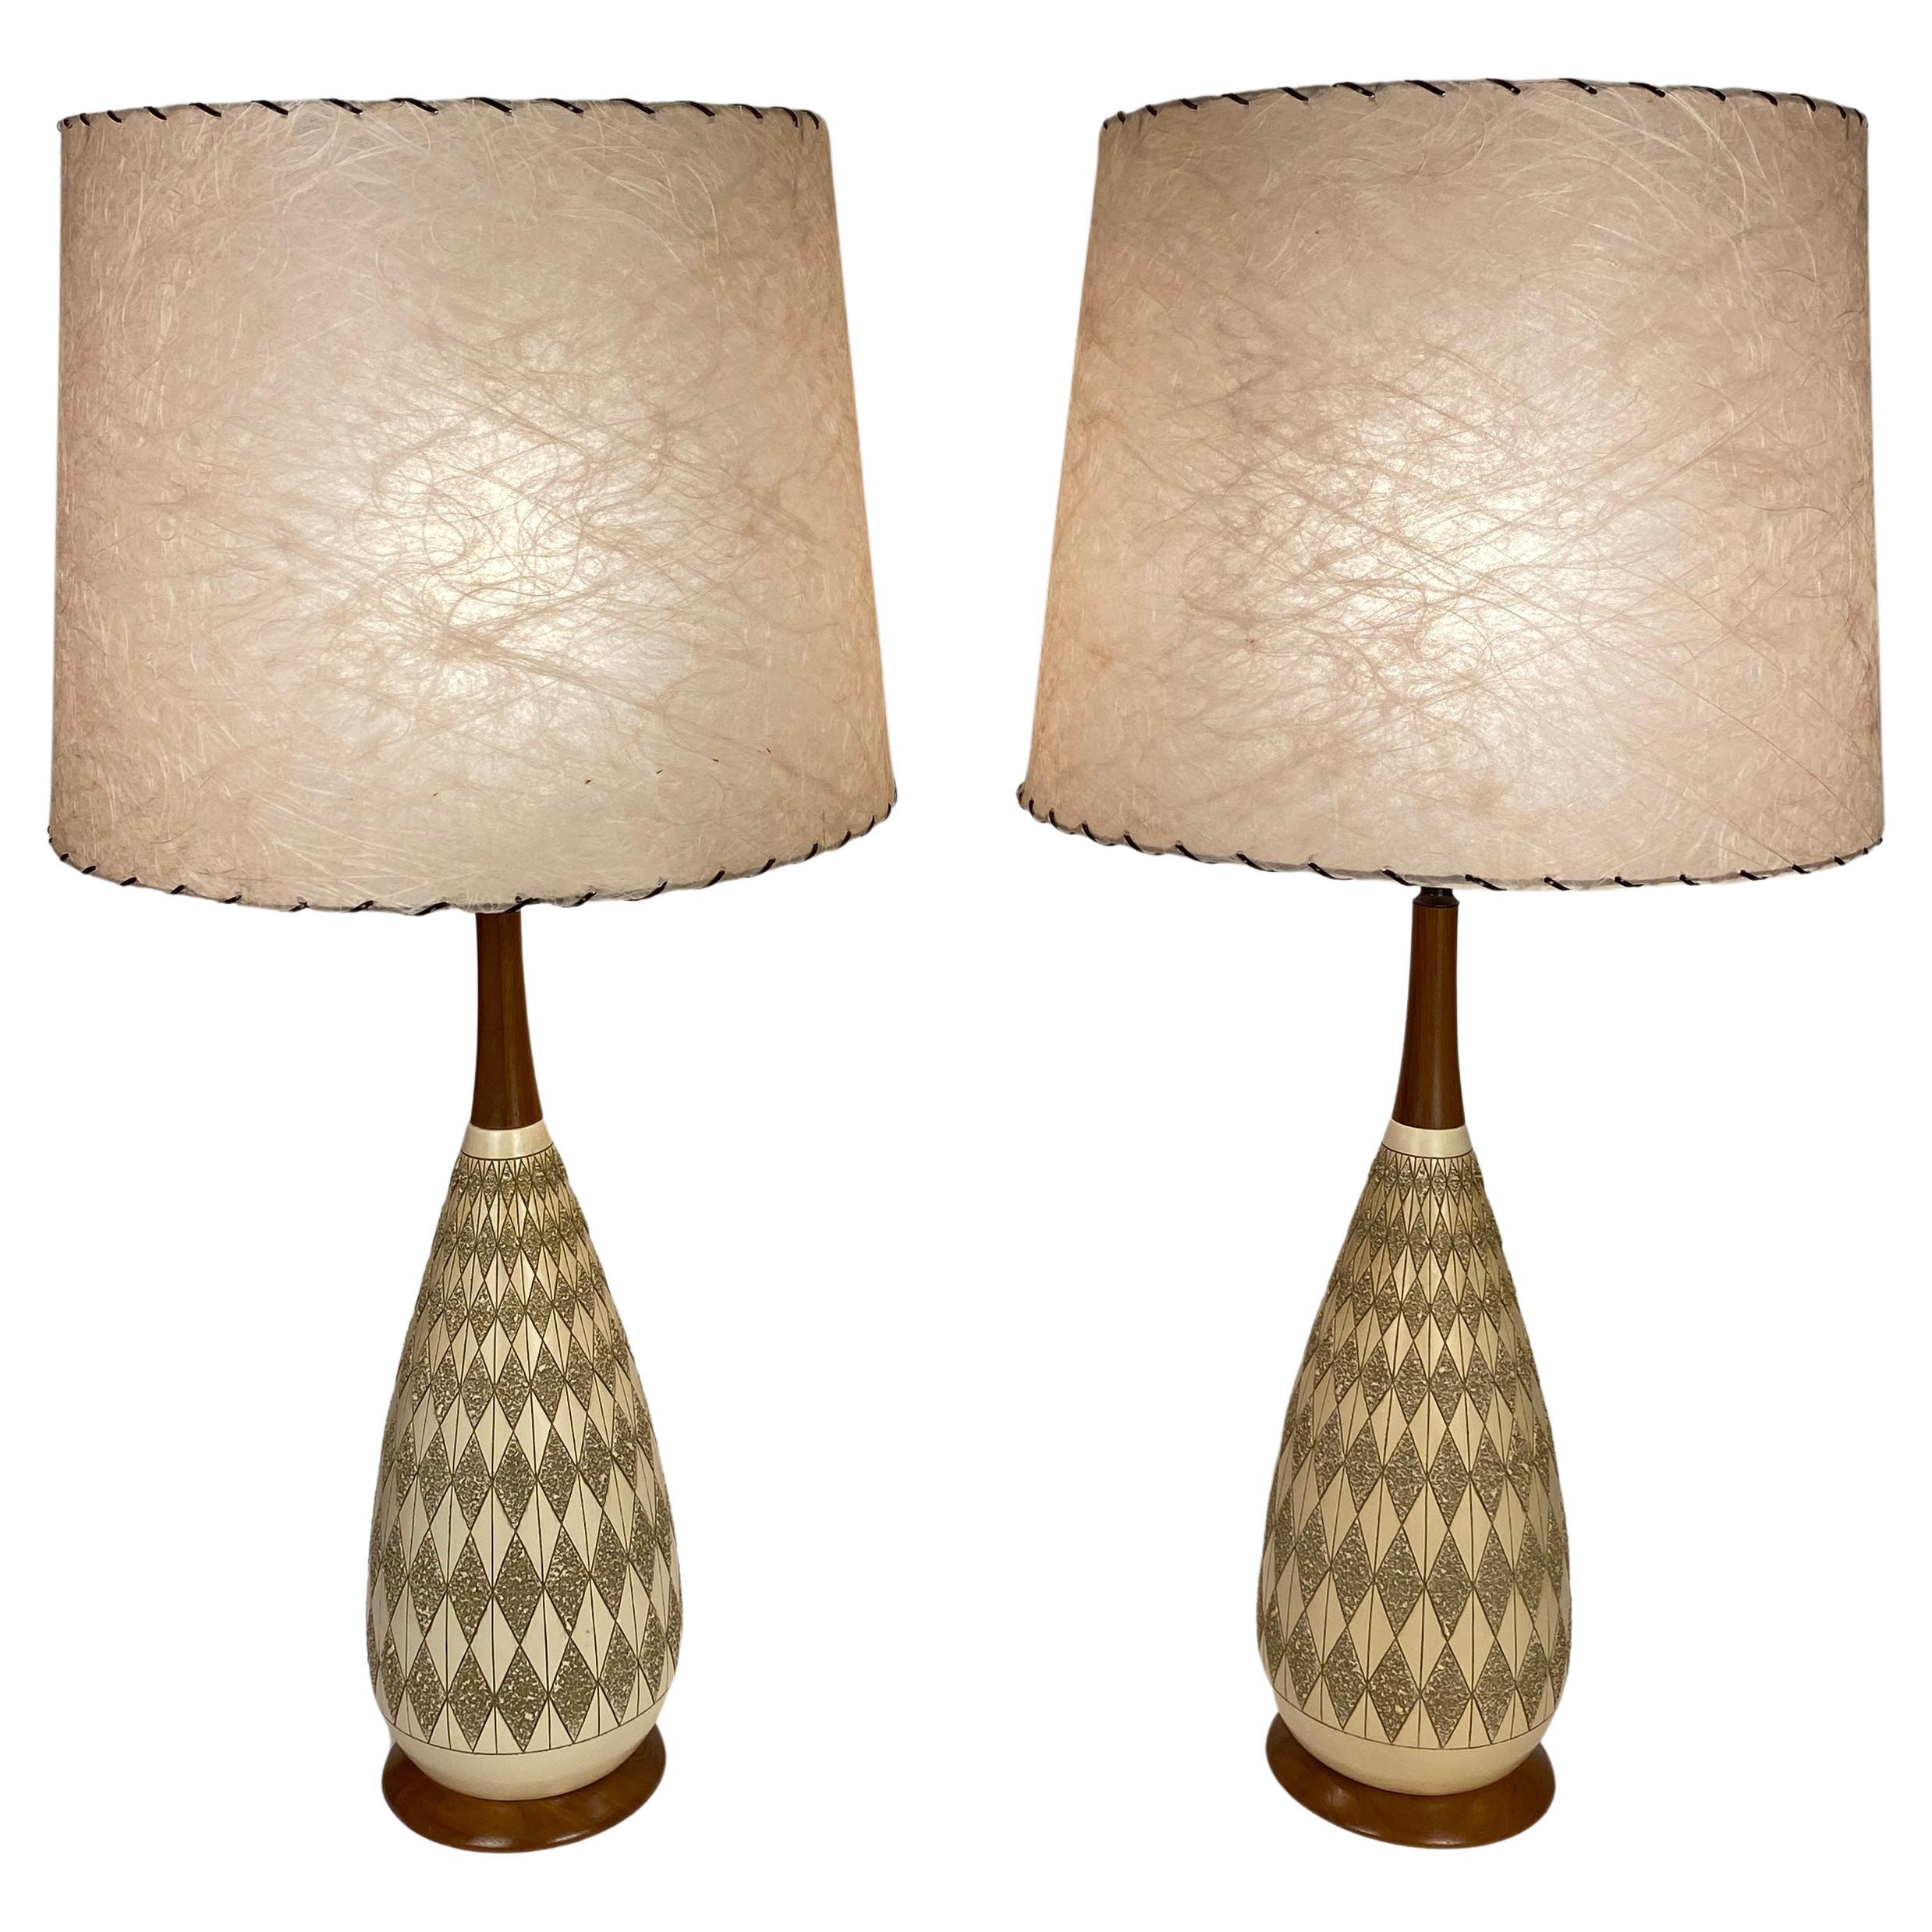 Pair of Beige Mid-Century Table Lamps by Quartite Creative Corp.